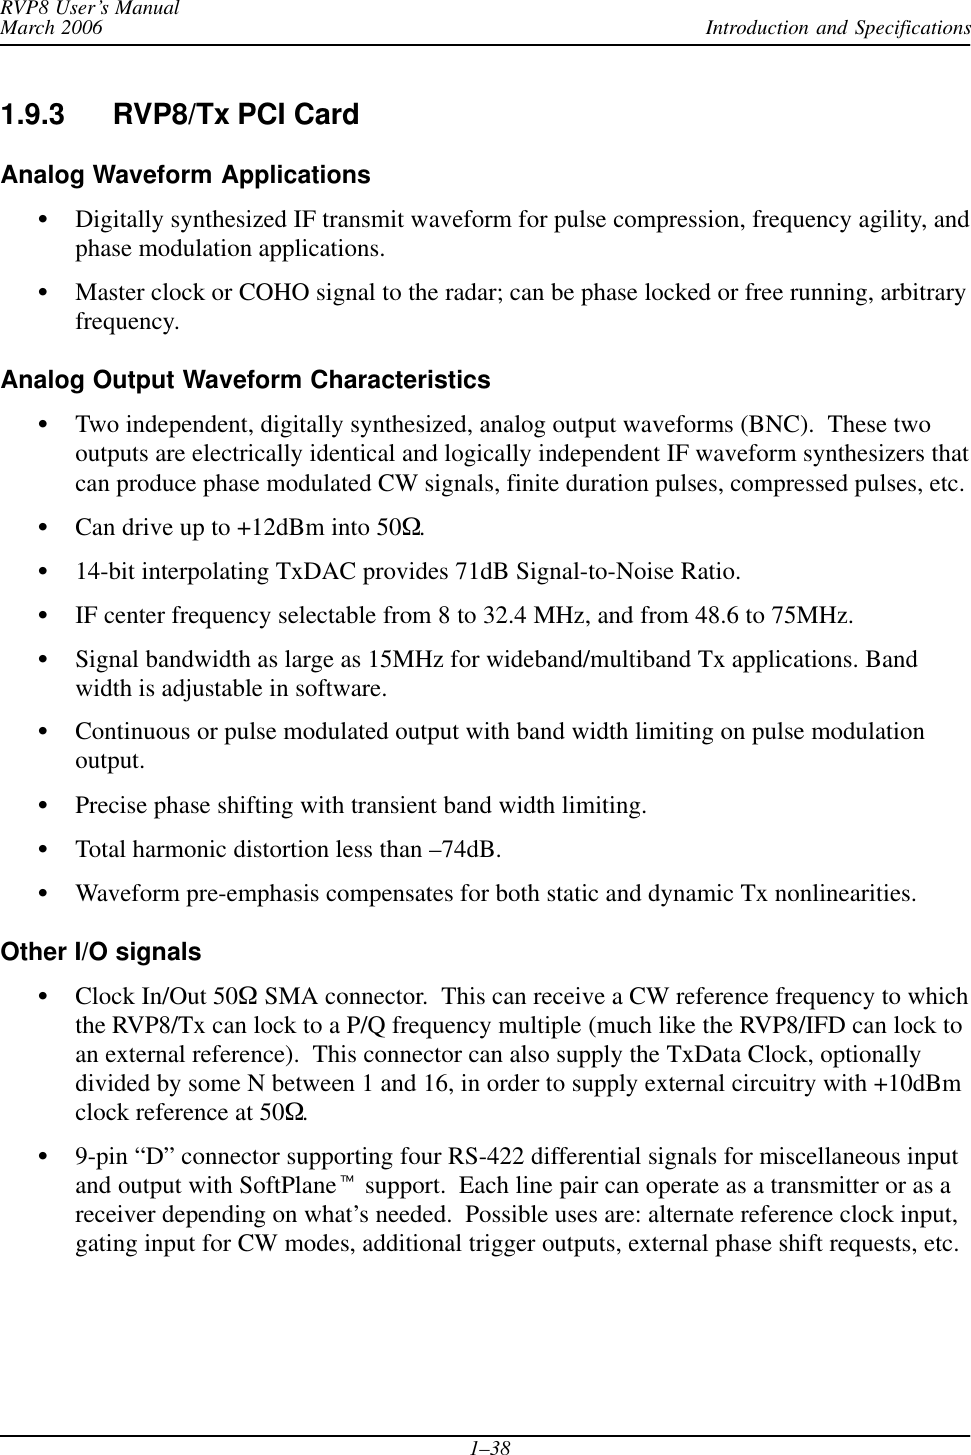 Introduction and SpecificationsRVP8 User’s ManualMarch 20061–381.9.3 RVP8/Tx PCI CardAnalog Waveform ApplicationsSDigitally synthesized IF transmit waveform for pulse compression, frequency agility, andphase modulation applications.SMaster clock or COHO signal to the radar; can be phase locked or free running, arbitraryfrequency.Analog Output Waveform CharacteristicsSTwo independent, digitally synthesized, analog output waveforms (BNC).  These twooutputs are electrically identical and logically independent IF waveform synthesizers thatcan produce phase modulated CW signals, finite duration pulses, compressed pulses, etc.SCan drive up to +12dBm into 50W.S14-bit interpolating TxDAC provides 71dB Signal-to-Noise Ratio.SIF center frequency selectable from 8 to 32.4 MHz, and from 48.6 to 75MHz.SSignal bandwidth as large as 15MHz for wideband/multiband Tx applications. Bandwidth is adjustable in software.SContinuous or pulse modulated output with band width limiting on pulse modulationoutput.SPrecise phase shifting with transient band width limiting.STotal harmonic distortion less than –74dB.SWaveform pre-emphasis compensates for both static and dynamic Tx nonlinearities.Other I/O signalsSClock In/Out 50W SMA connector.  This can receive a CW reference frequency to whichthe RVP8/Tx can lock to a P/Q frequency multiple (much like the RVP8/IFD can lock toan external reference).  This connector can also supply the TxData Clock, optionallydivided by some N between 1 and 16, in order to supply external circuitry with +10dBmclock reference at 50W.S9-pin “D” connector supporting four RS-422 differential signals for miscellaneous inputand output with SoftPlanet support.  Each line pair can operate as a transmitter or as areceiver depending on what’s needed.  Possible uses are: alternate reference clock input,gating input for CW modes, additional trigger outputs, external phase shift requests, etc.